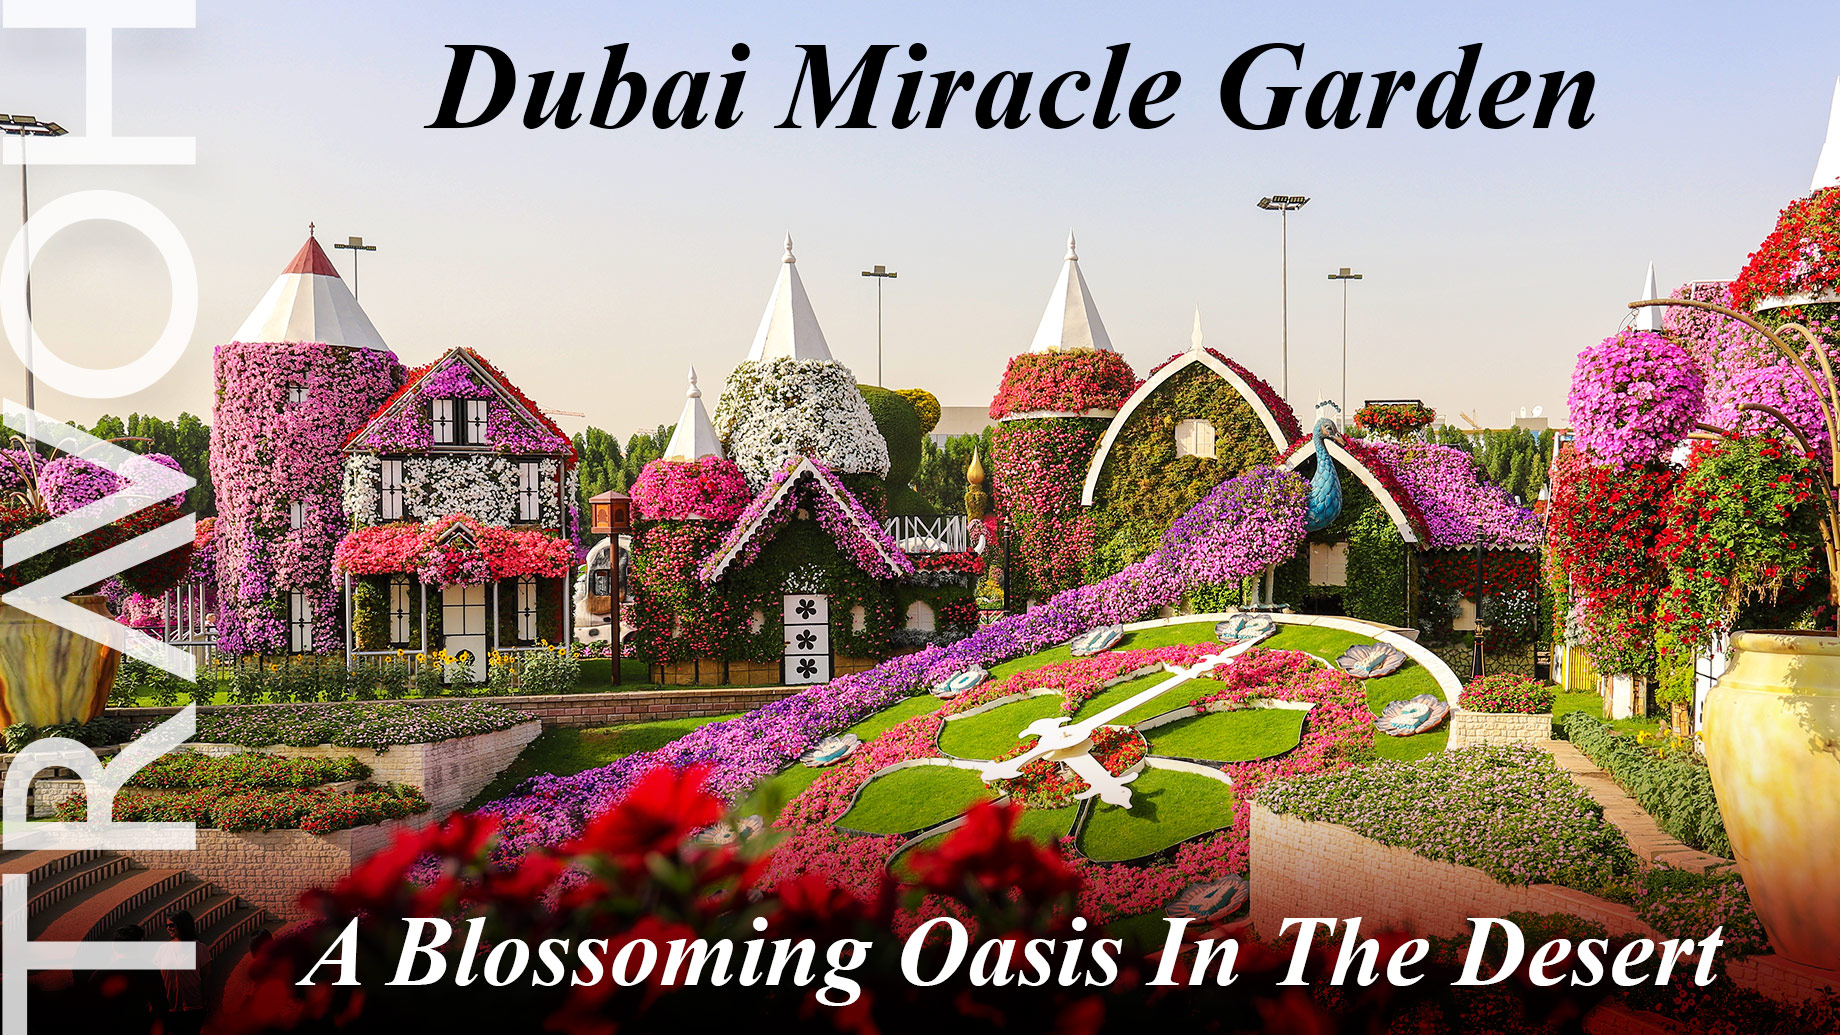 Dubai Miracle Garden: A Blossoming Oasis In The Desert